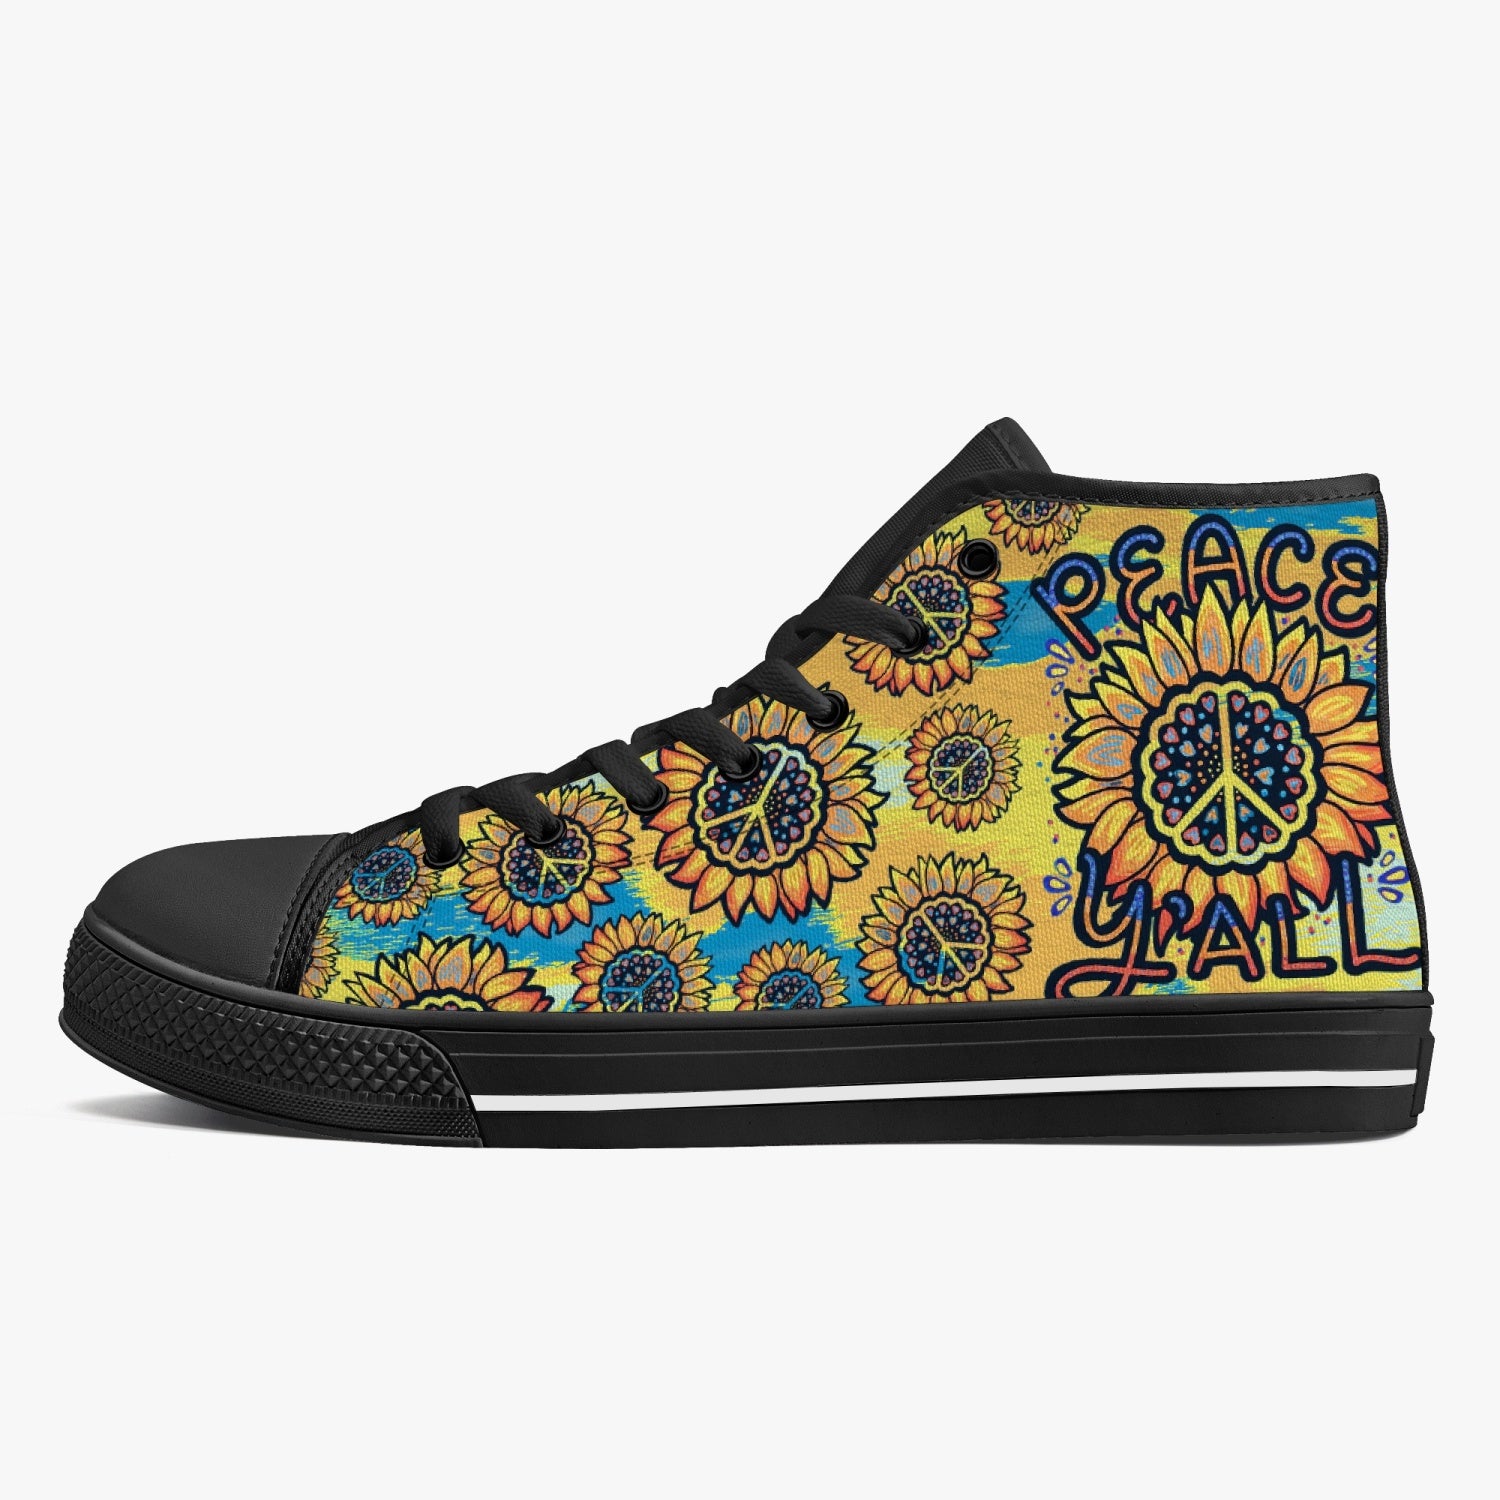 PEACE Y'ALL TIE DYE HIGH TOP CANVAS SHOES - TLTR0606234